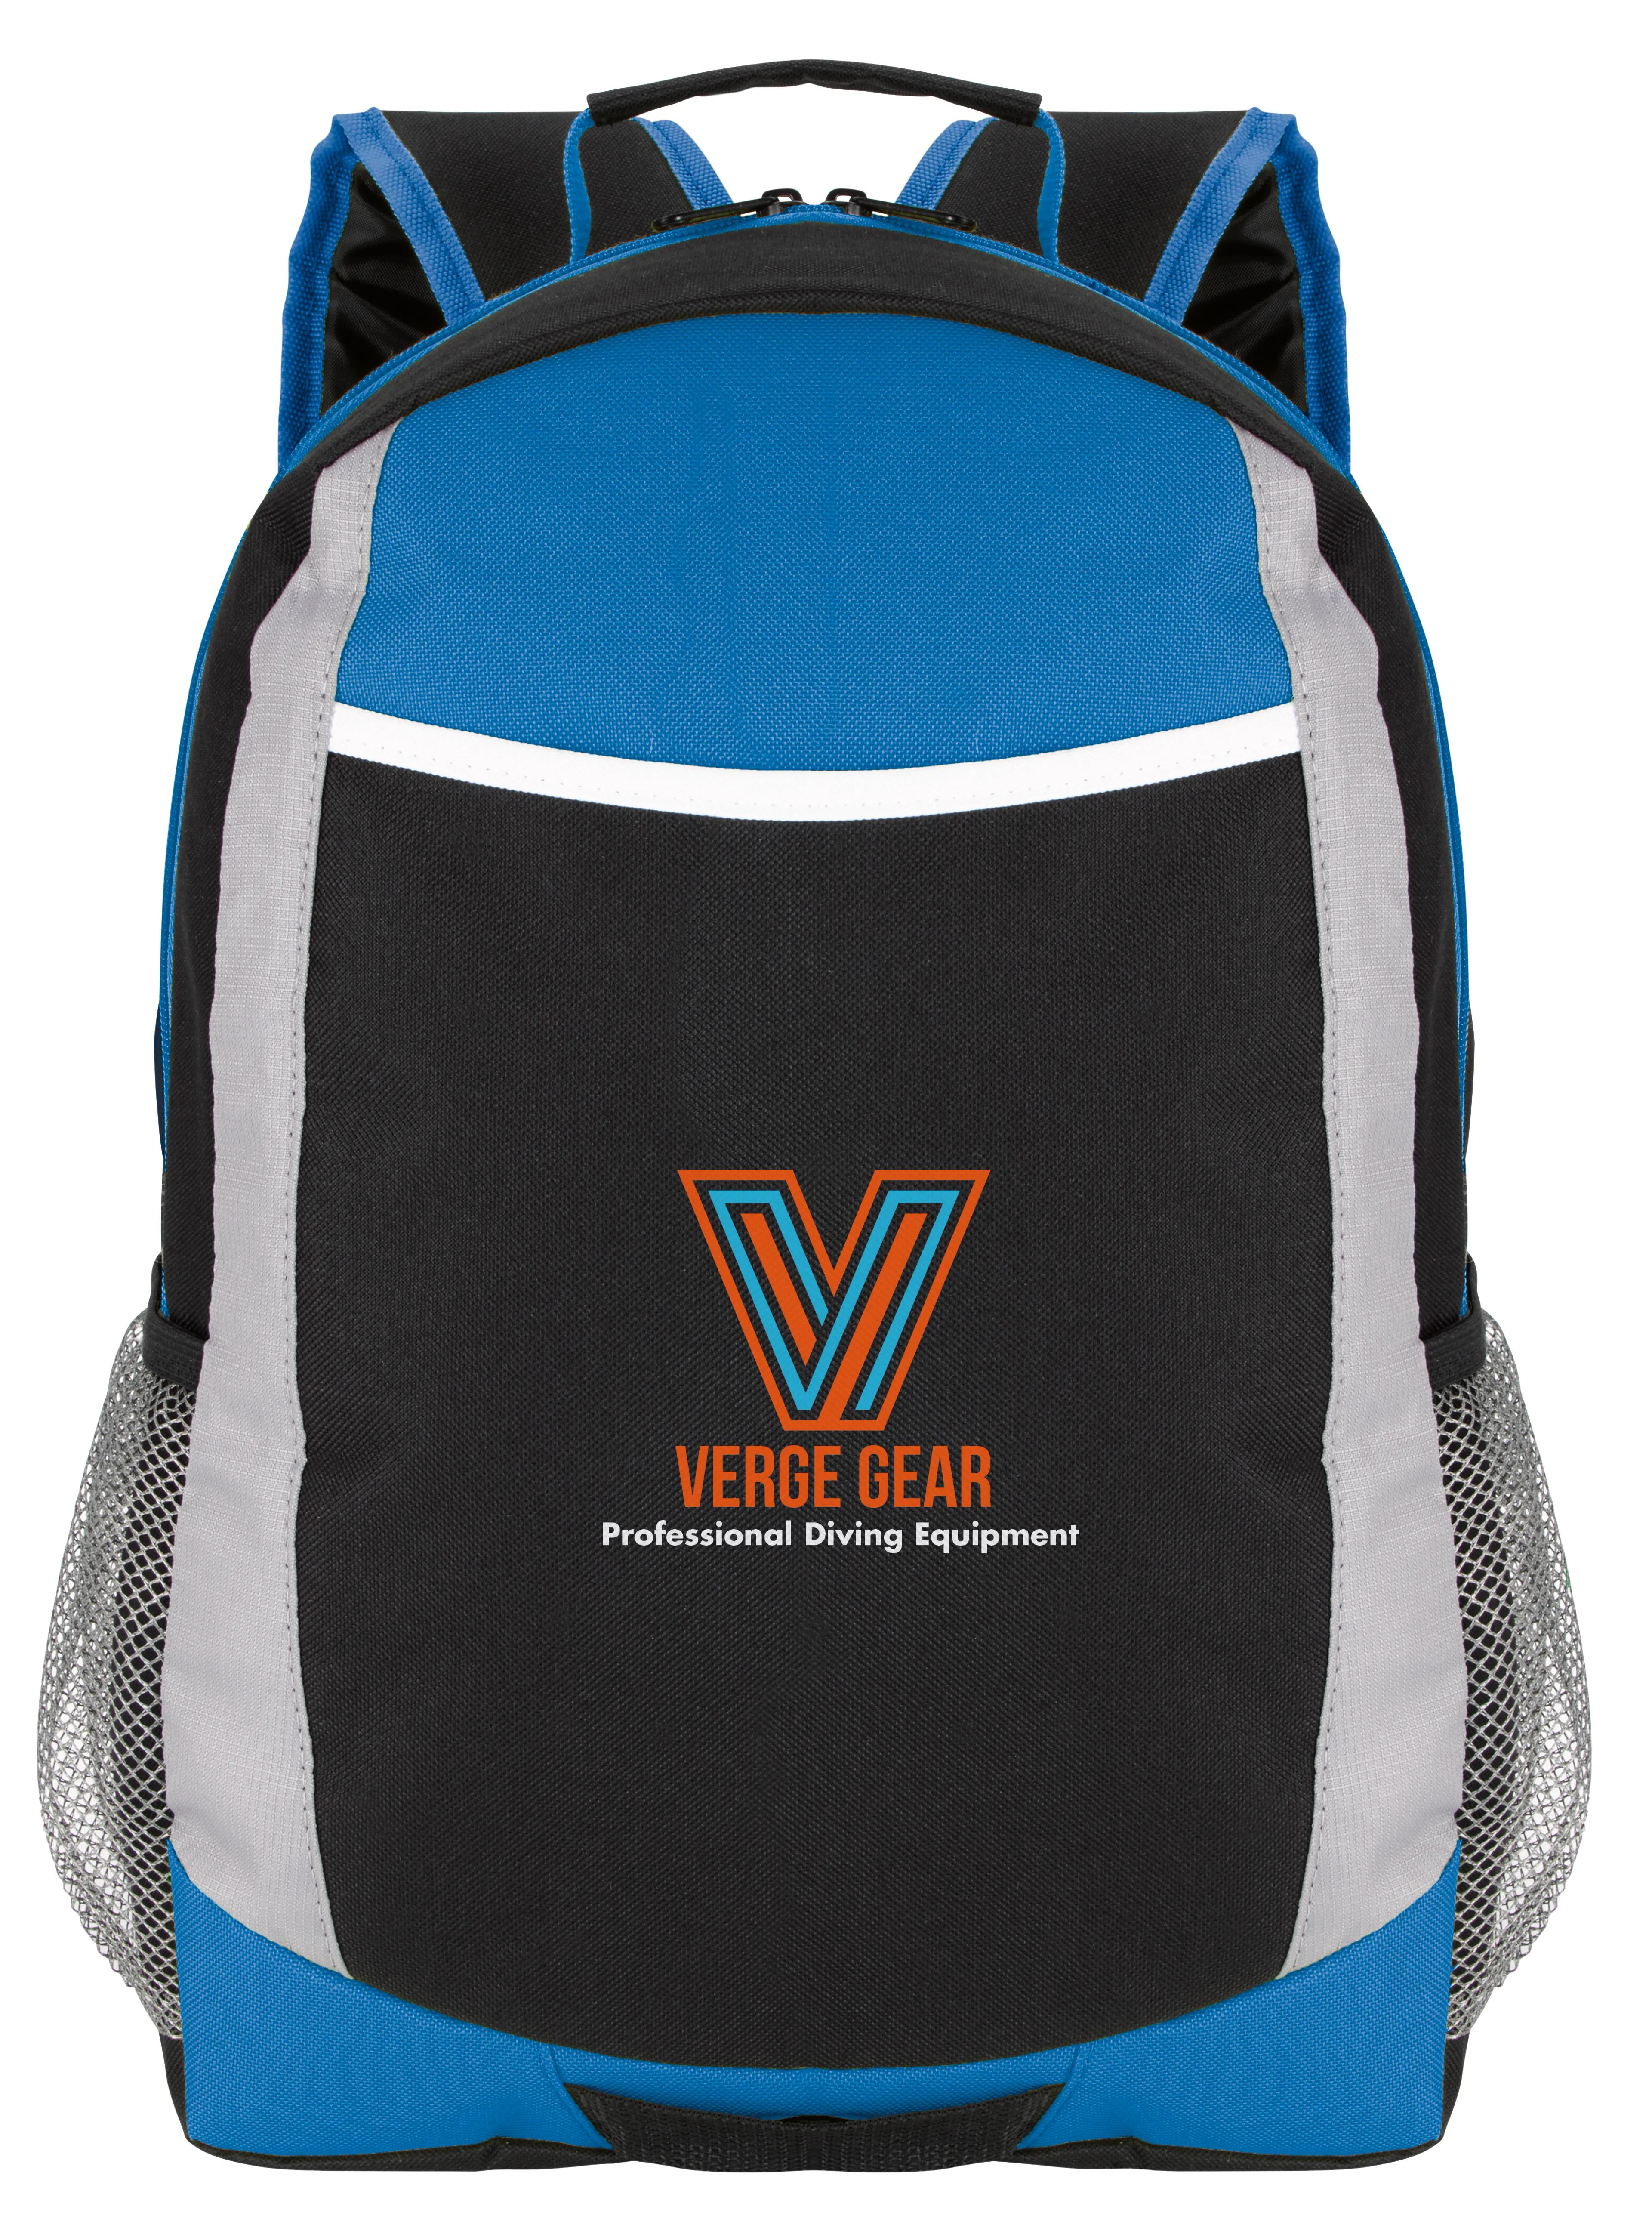 Primary Sport Backpack 13 of 14